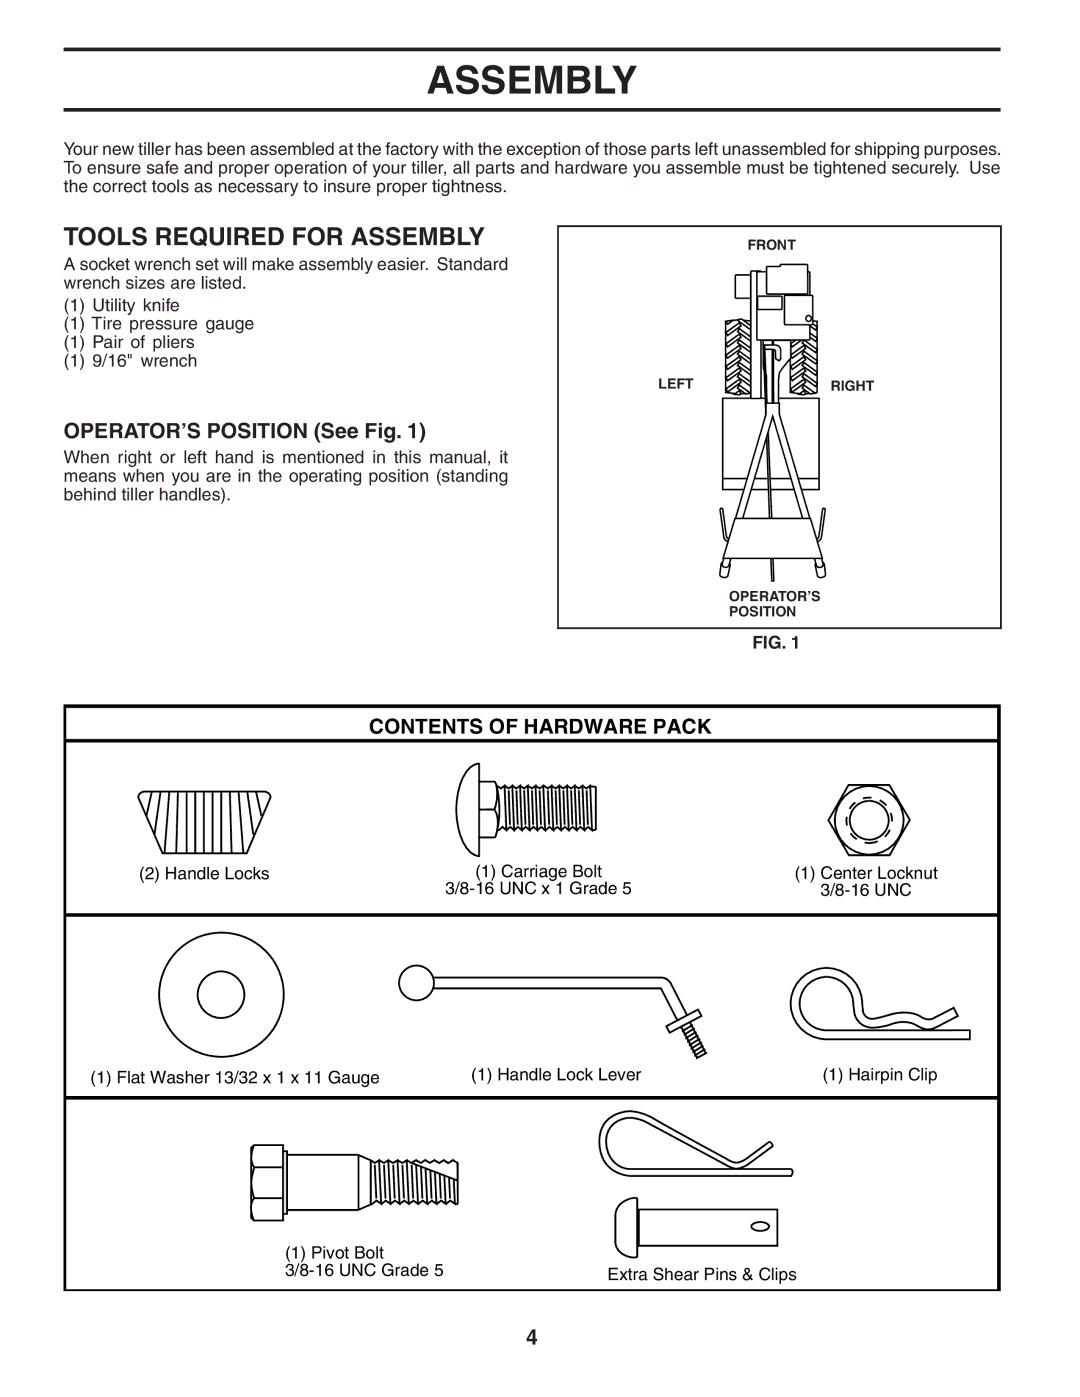 Maxim MXR500 owner manual Tools Required for Assembly, OPERATOR’S Position See Fig 